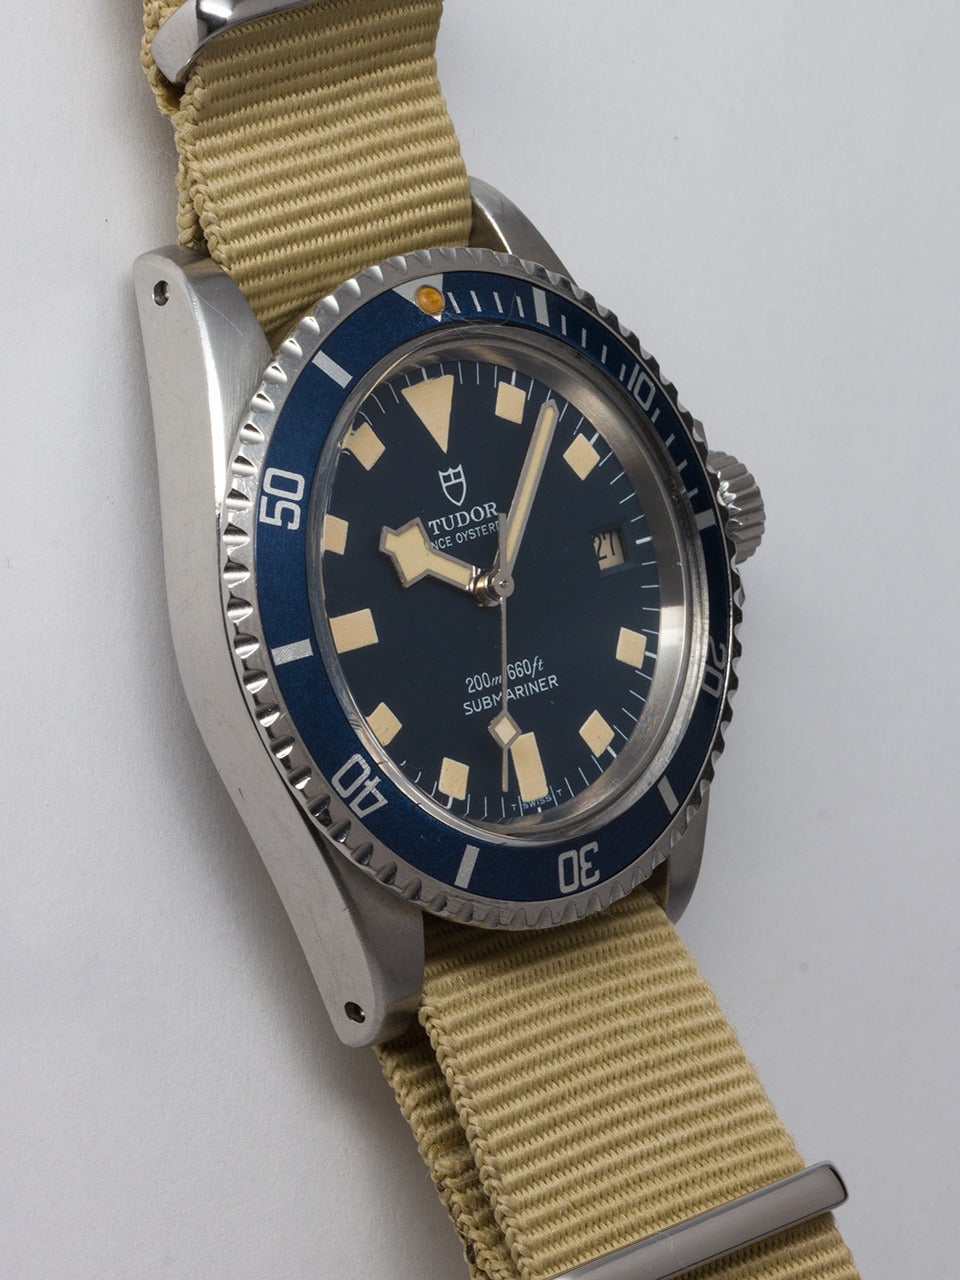 Tudor Stainless Steel Prince Oysterdate Submariner Wristwatch ref 7021/0 serial # 739,xxx circa 1970's. This is a so called Snowflake model. 40mm diameter case with bidirectional rotating bezel, with evenly faded navy blue elapsed time bezel insert